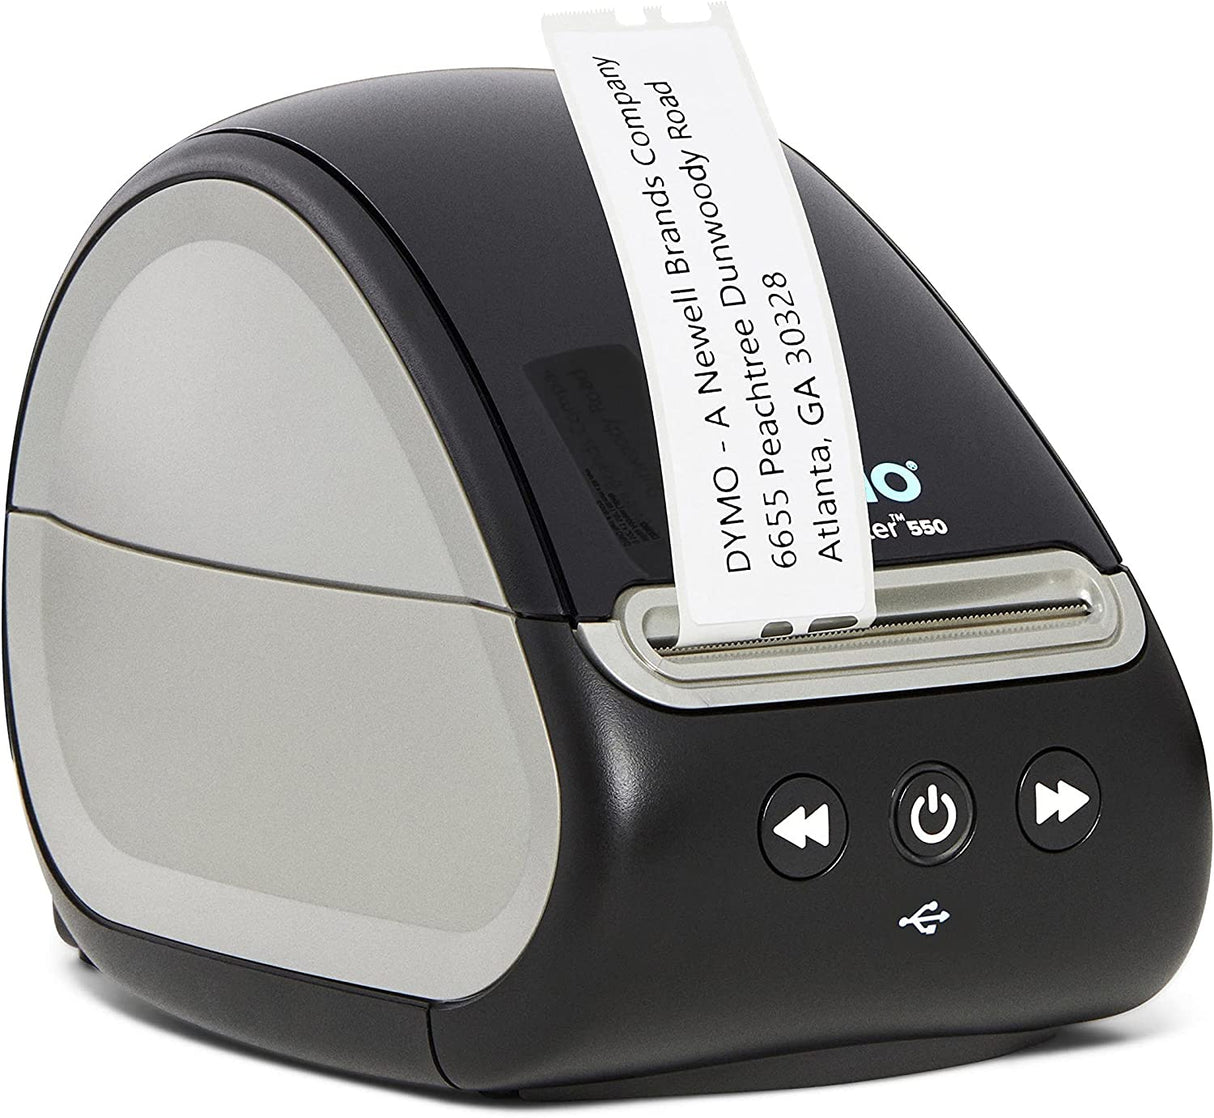 DYMO LabelWriter 550 Label Printer, Label Maker with Direct Thermal Printing, Automatic Label Recognition, Prints Address Labels, Shipping Labels, Mailing Labels, Barcode Labels, and More LabelWriter 550 Thermal Label Printers